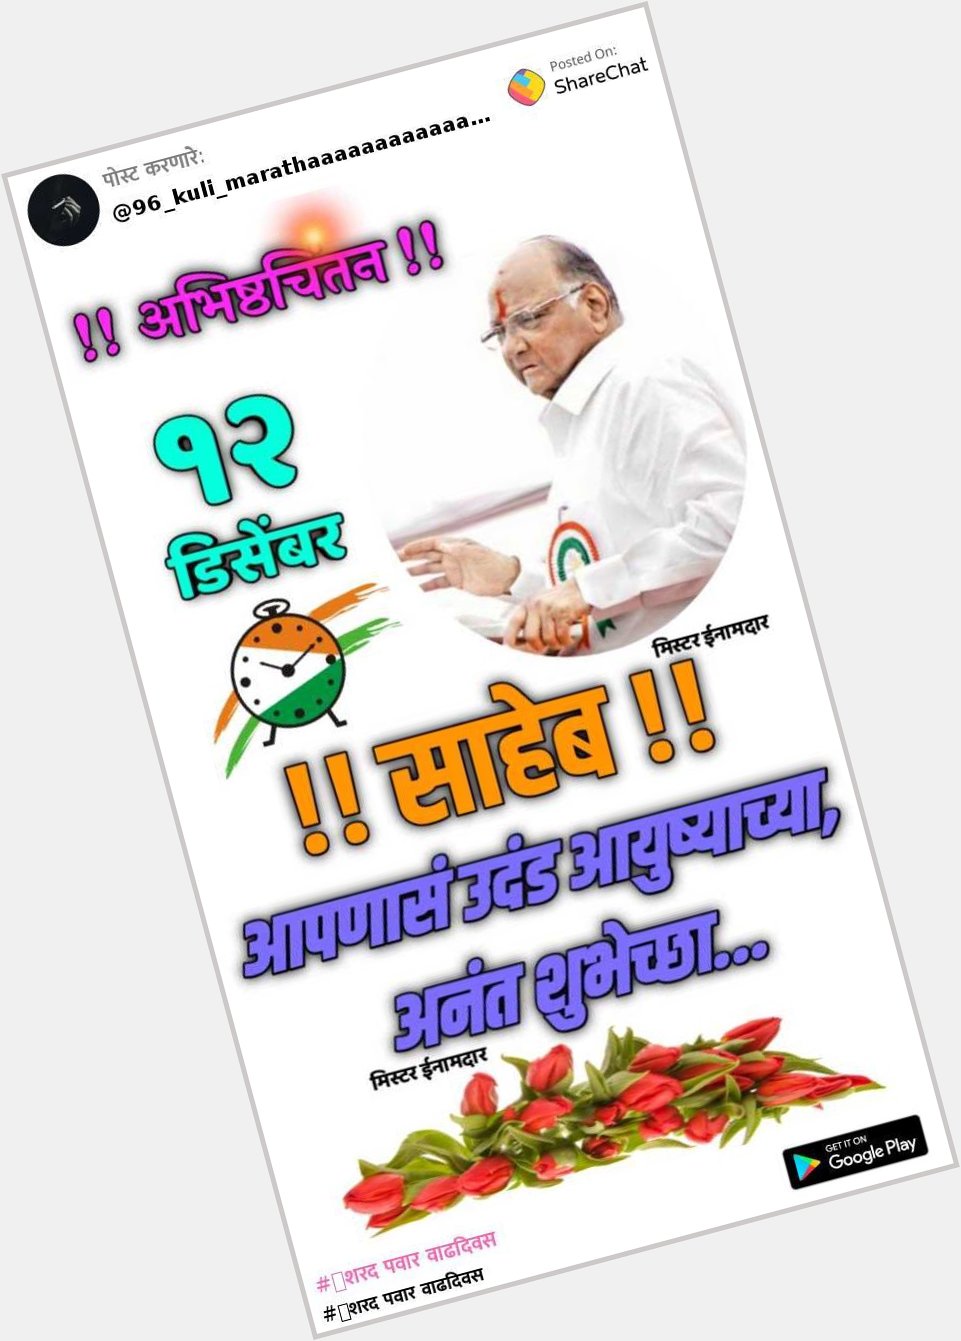  birthday to king of politics mr Sharad Pawar saheb from my all friends group   